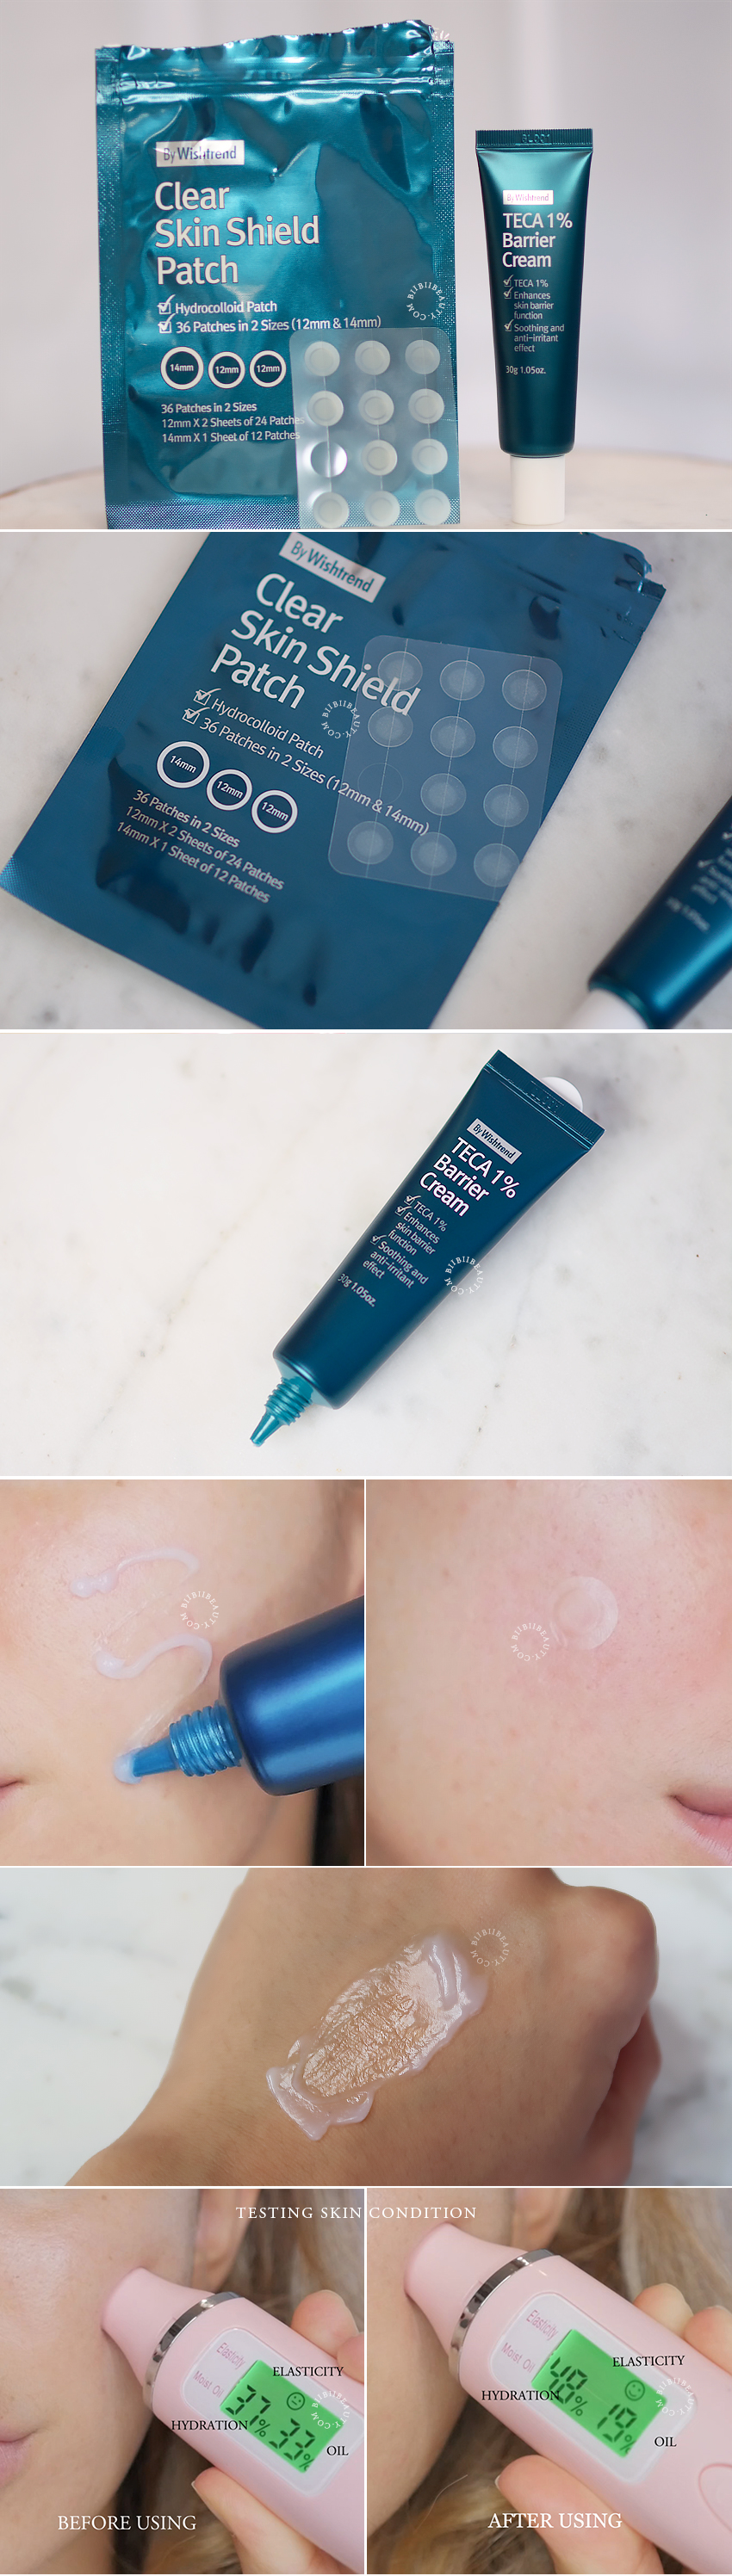 BY WISHTREND CLEAR SKIN SHIELD PATCH + TECA 1% BARRIER CREAM REVIEW BIIBIIBEAUTY